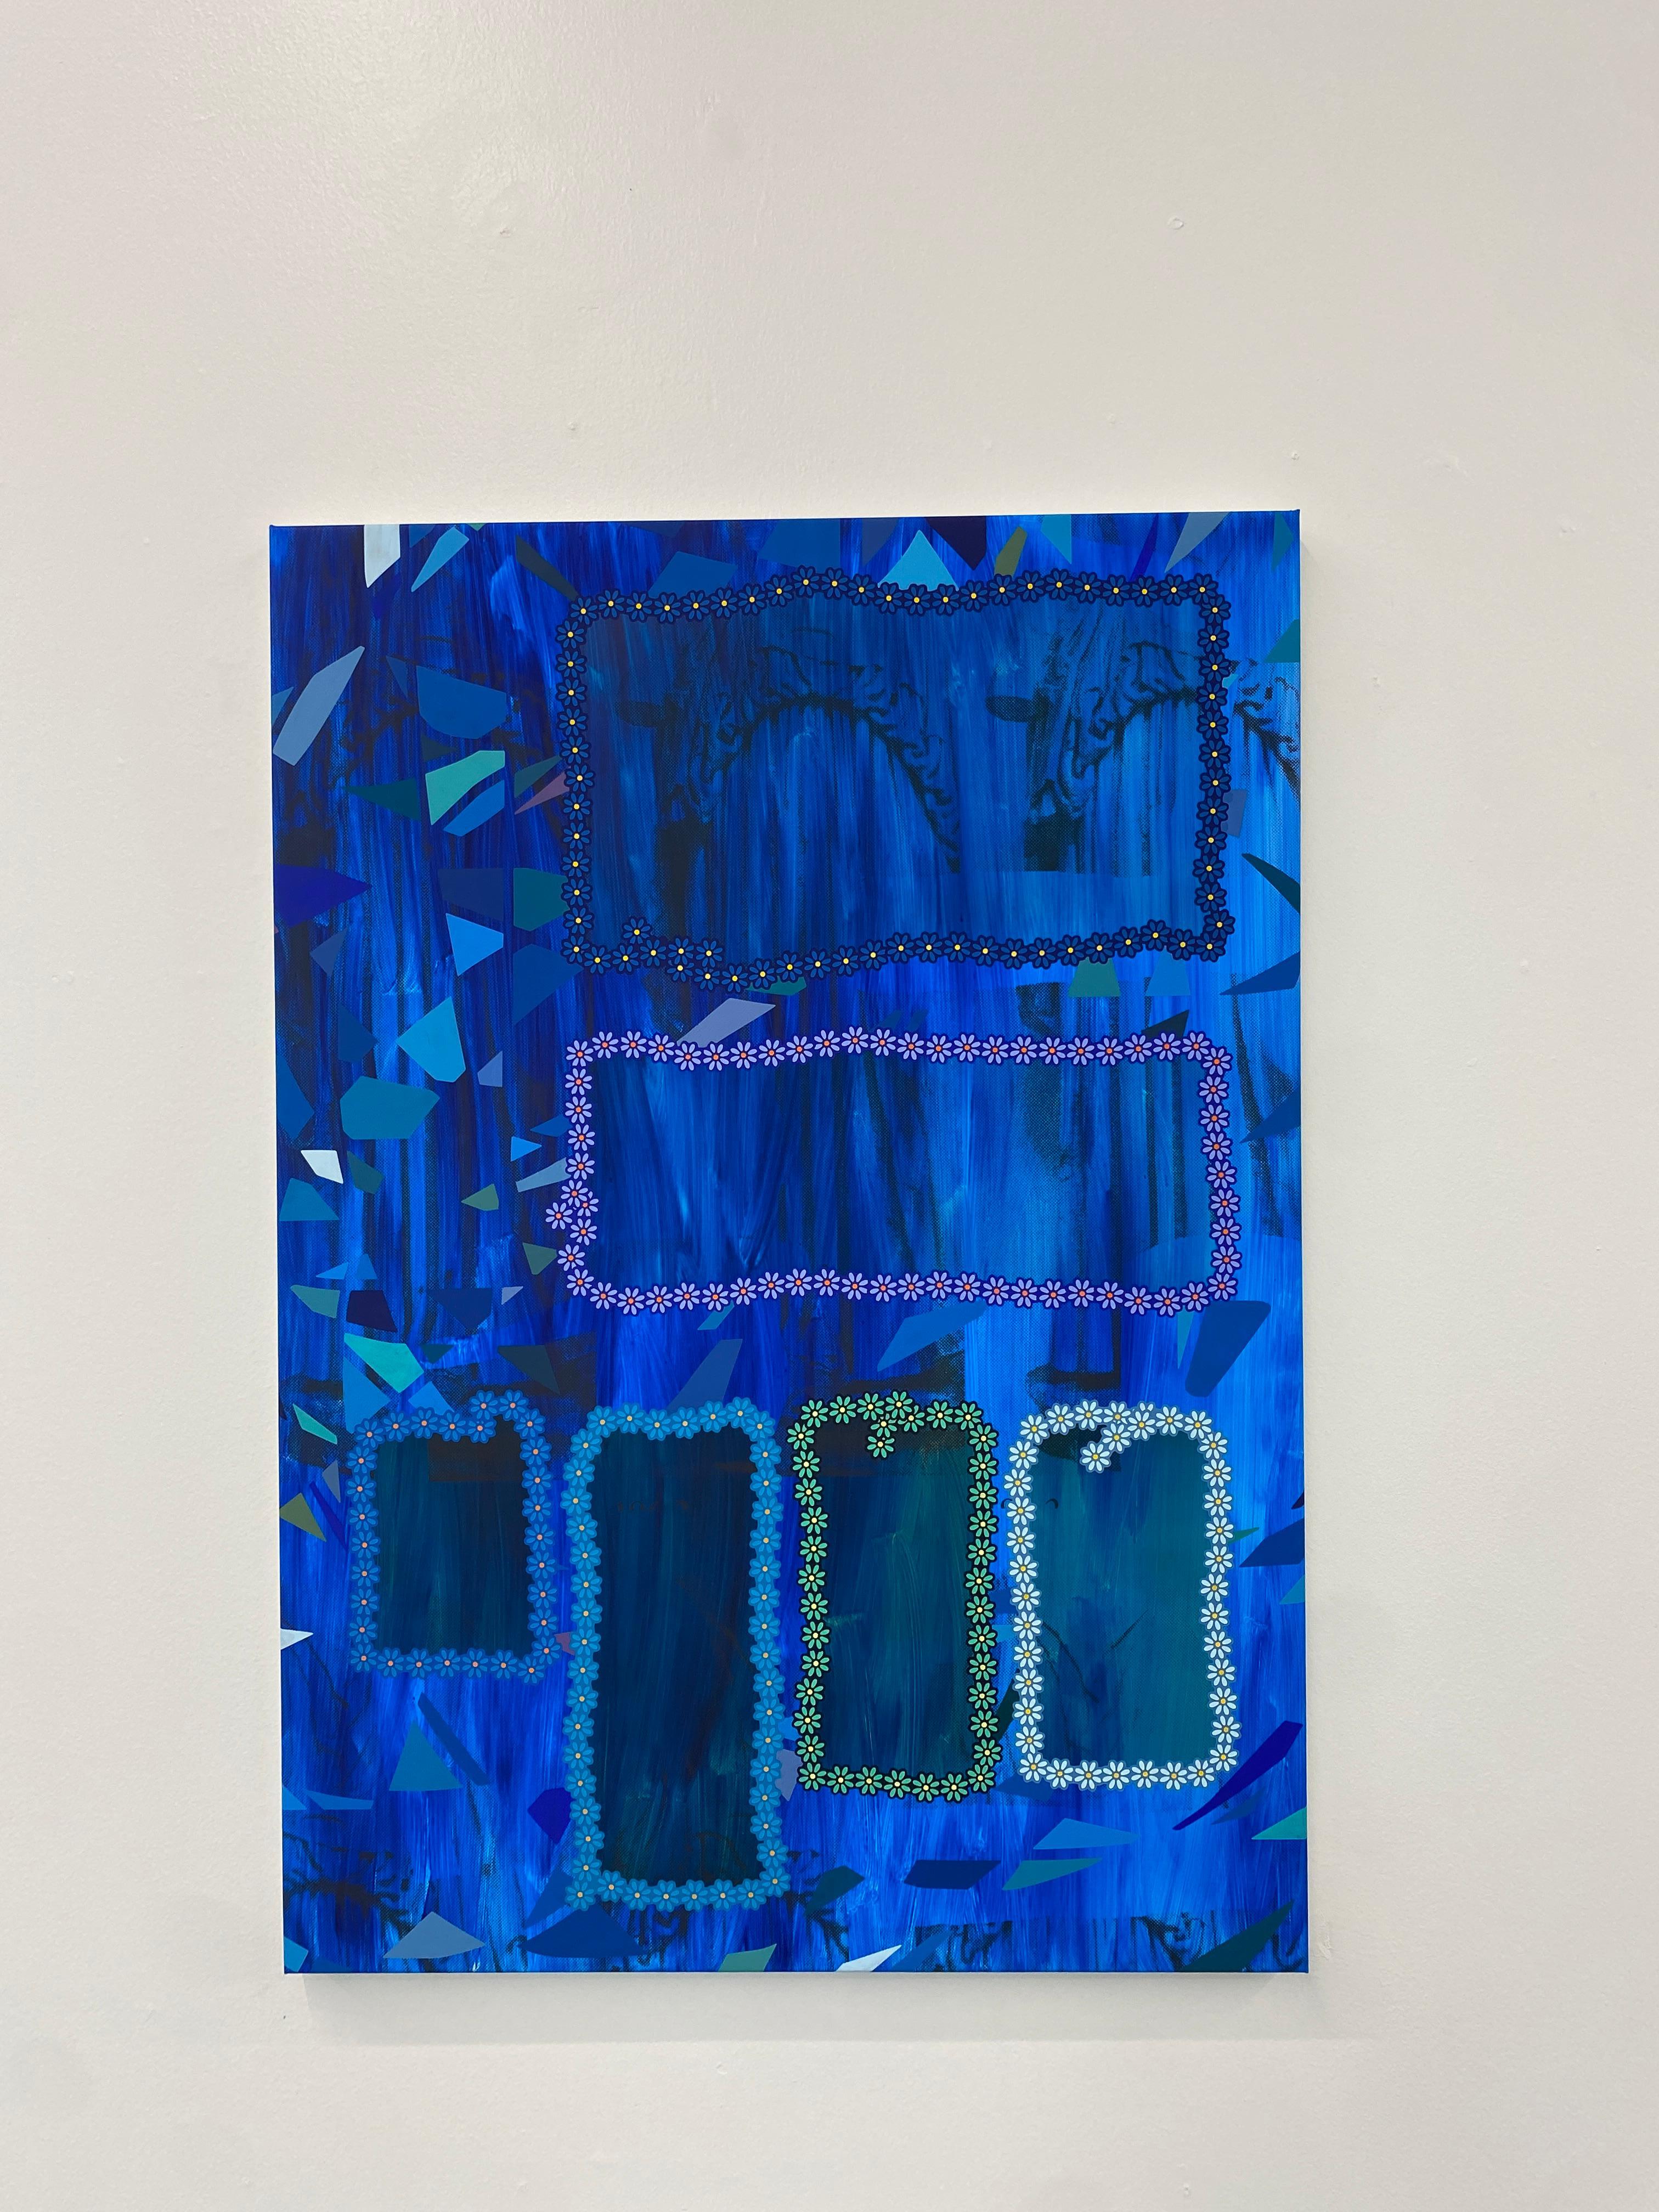 *On view at Ivester Contemporary through May 27th* 

In this newest body of paintings and prints, Fort Worth based artist Rachel Livedalen continues the exploration of femininity through the lens of art history and popular culture, but grid and